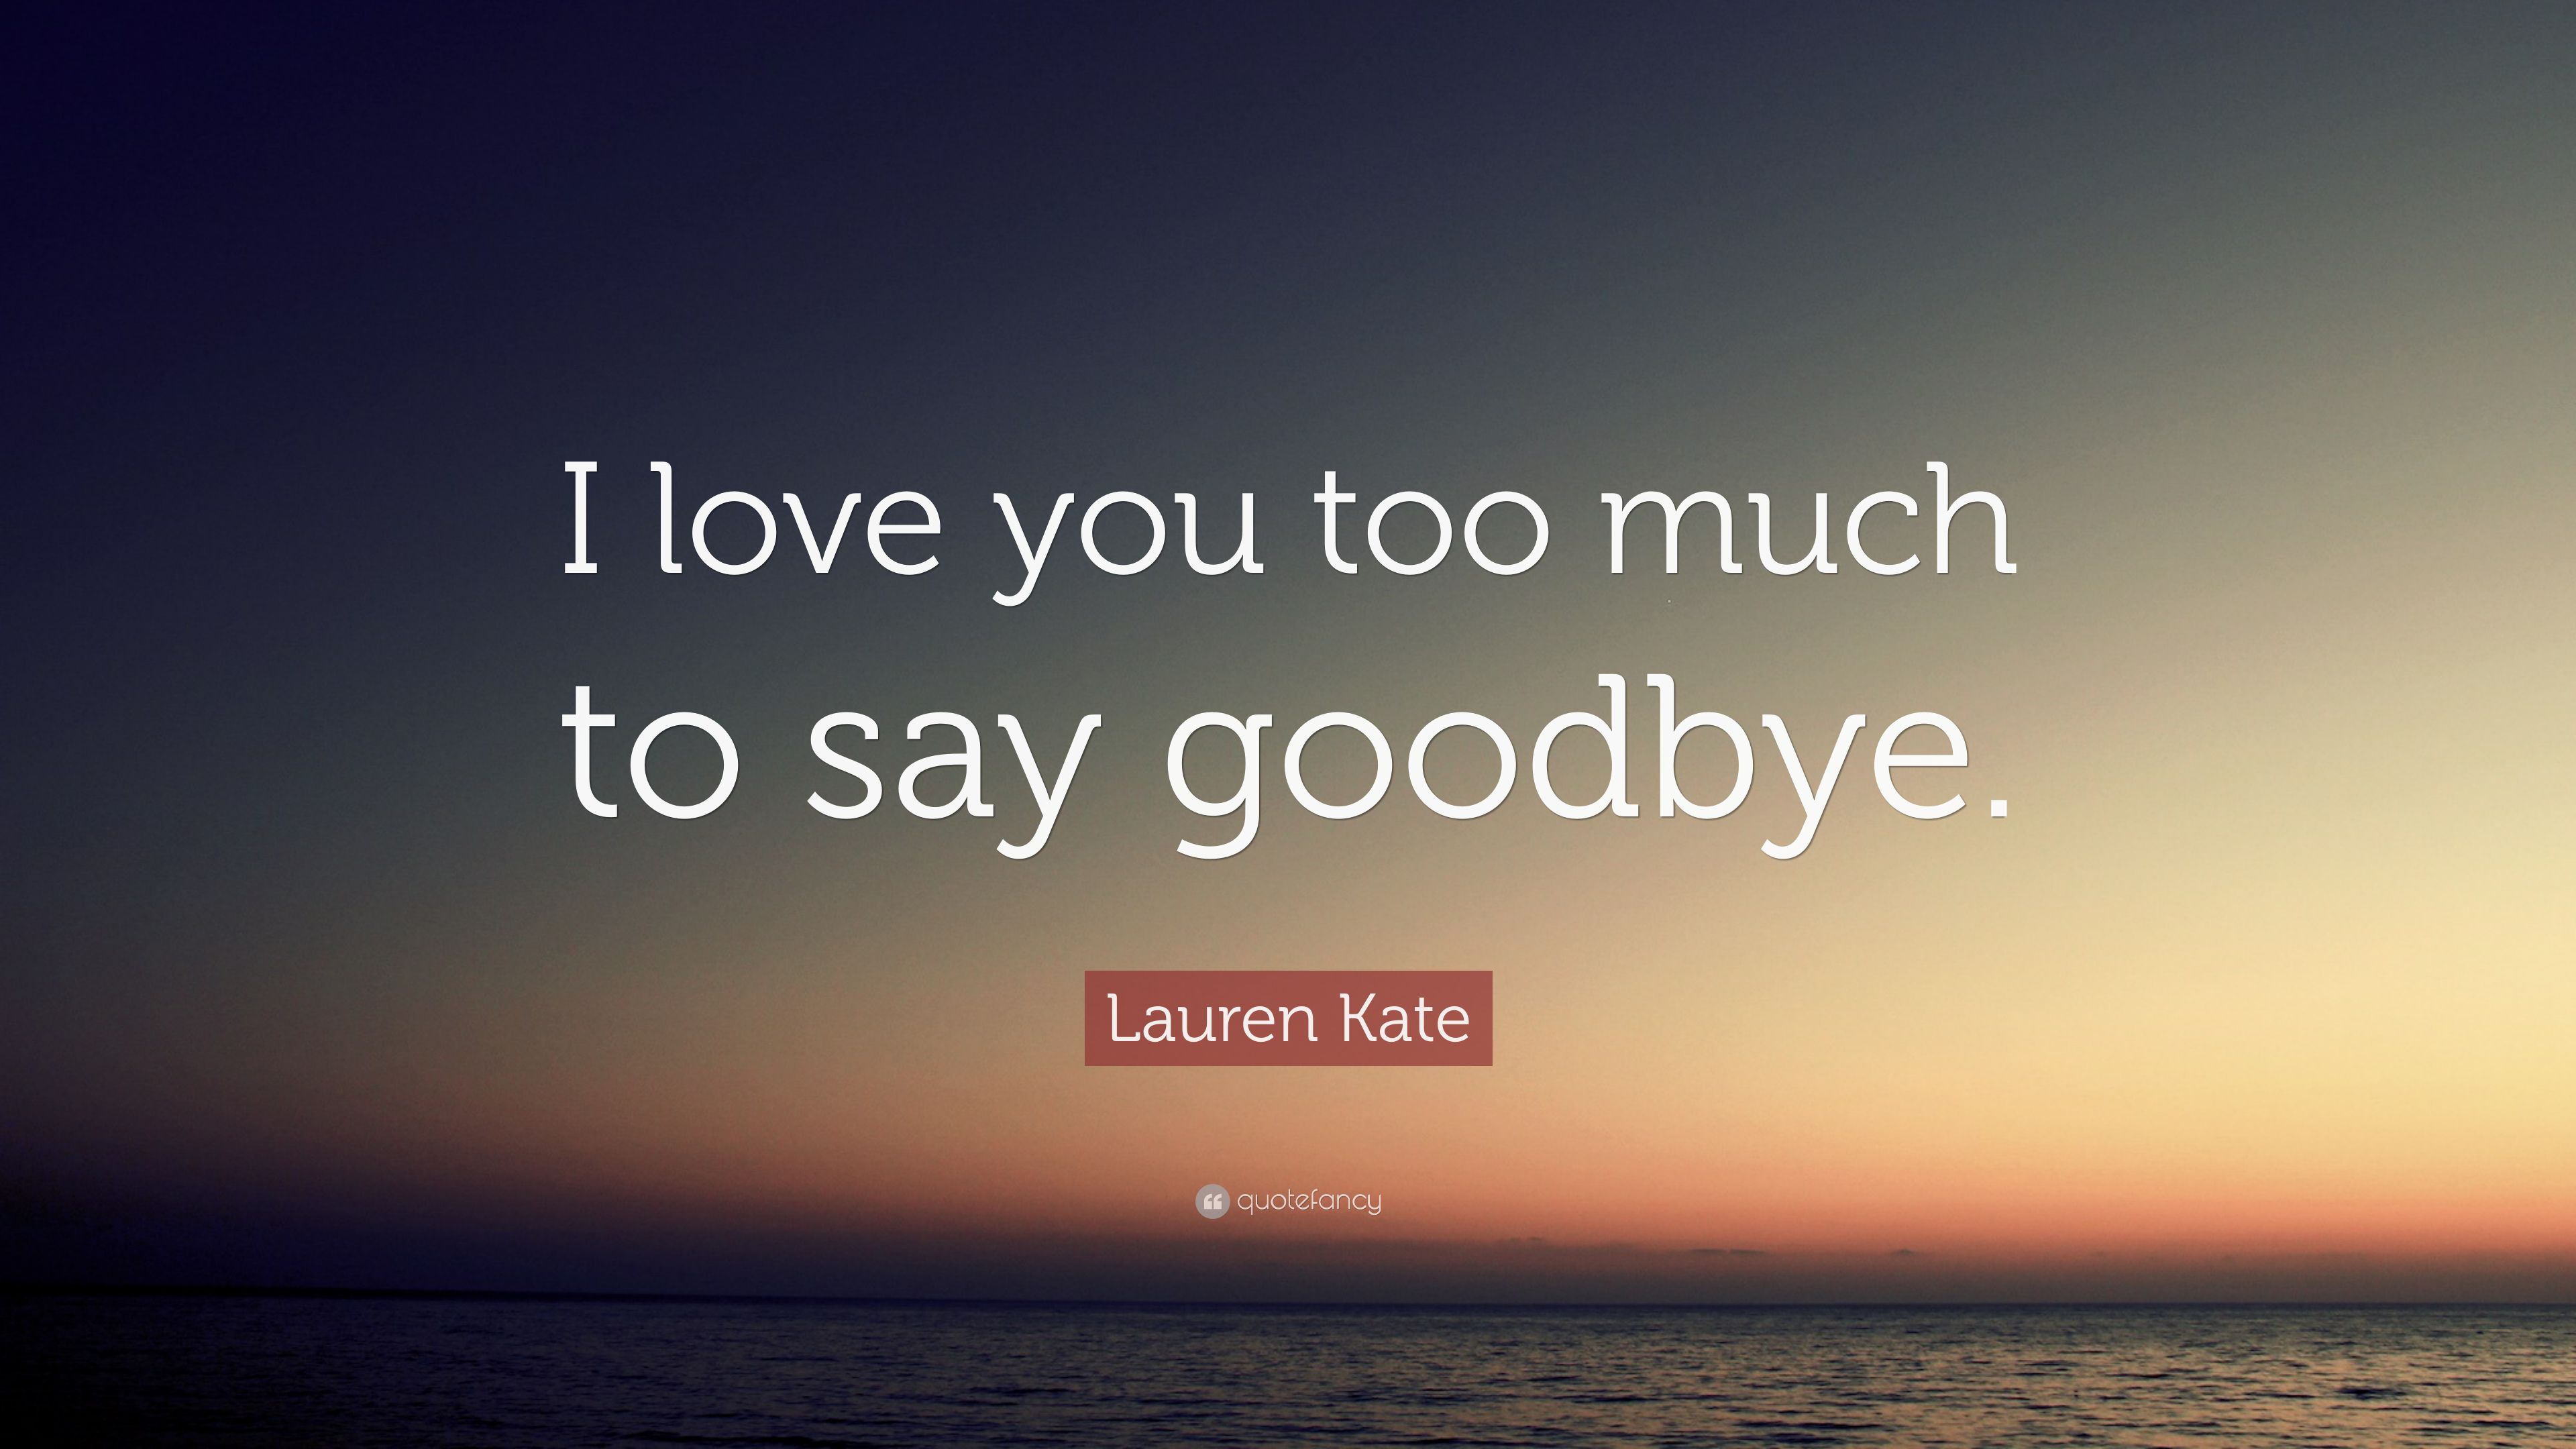 Lauren Kate Quote: “I love you too much to say goodbye.” (9 wallpaper)